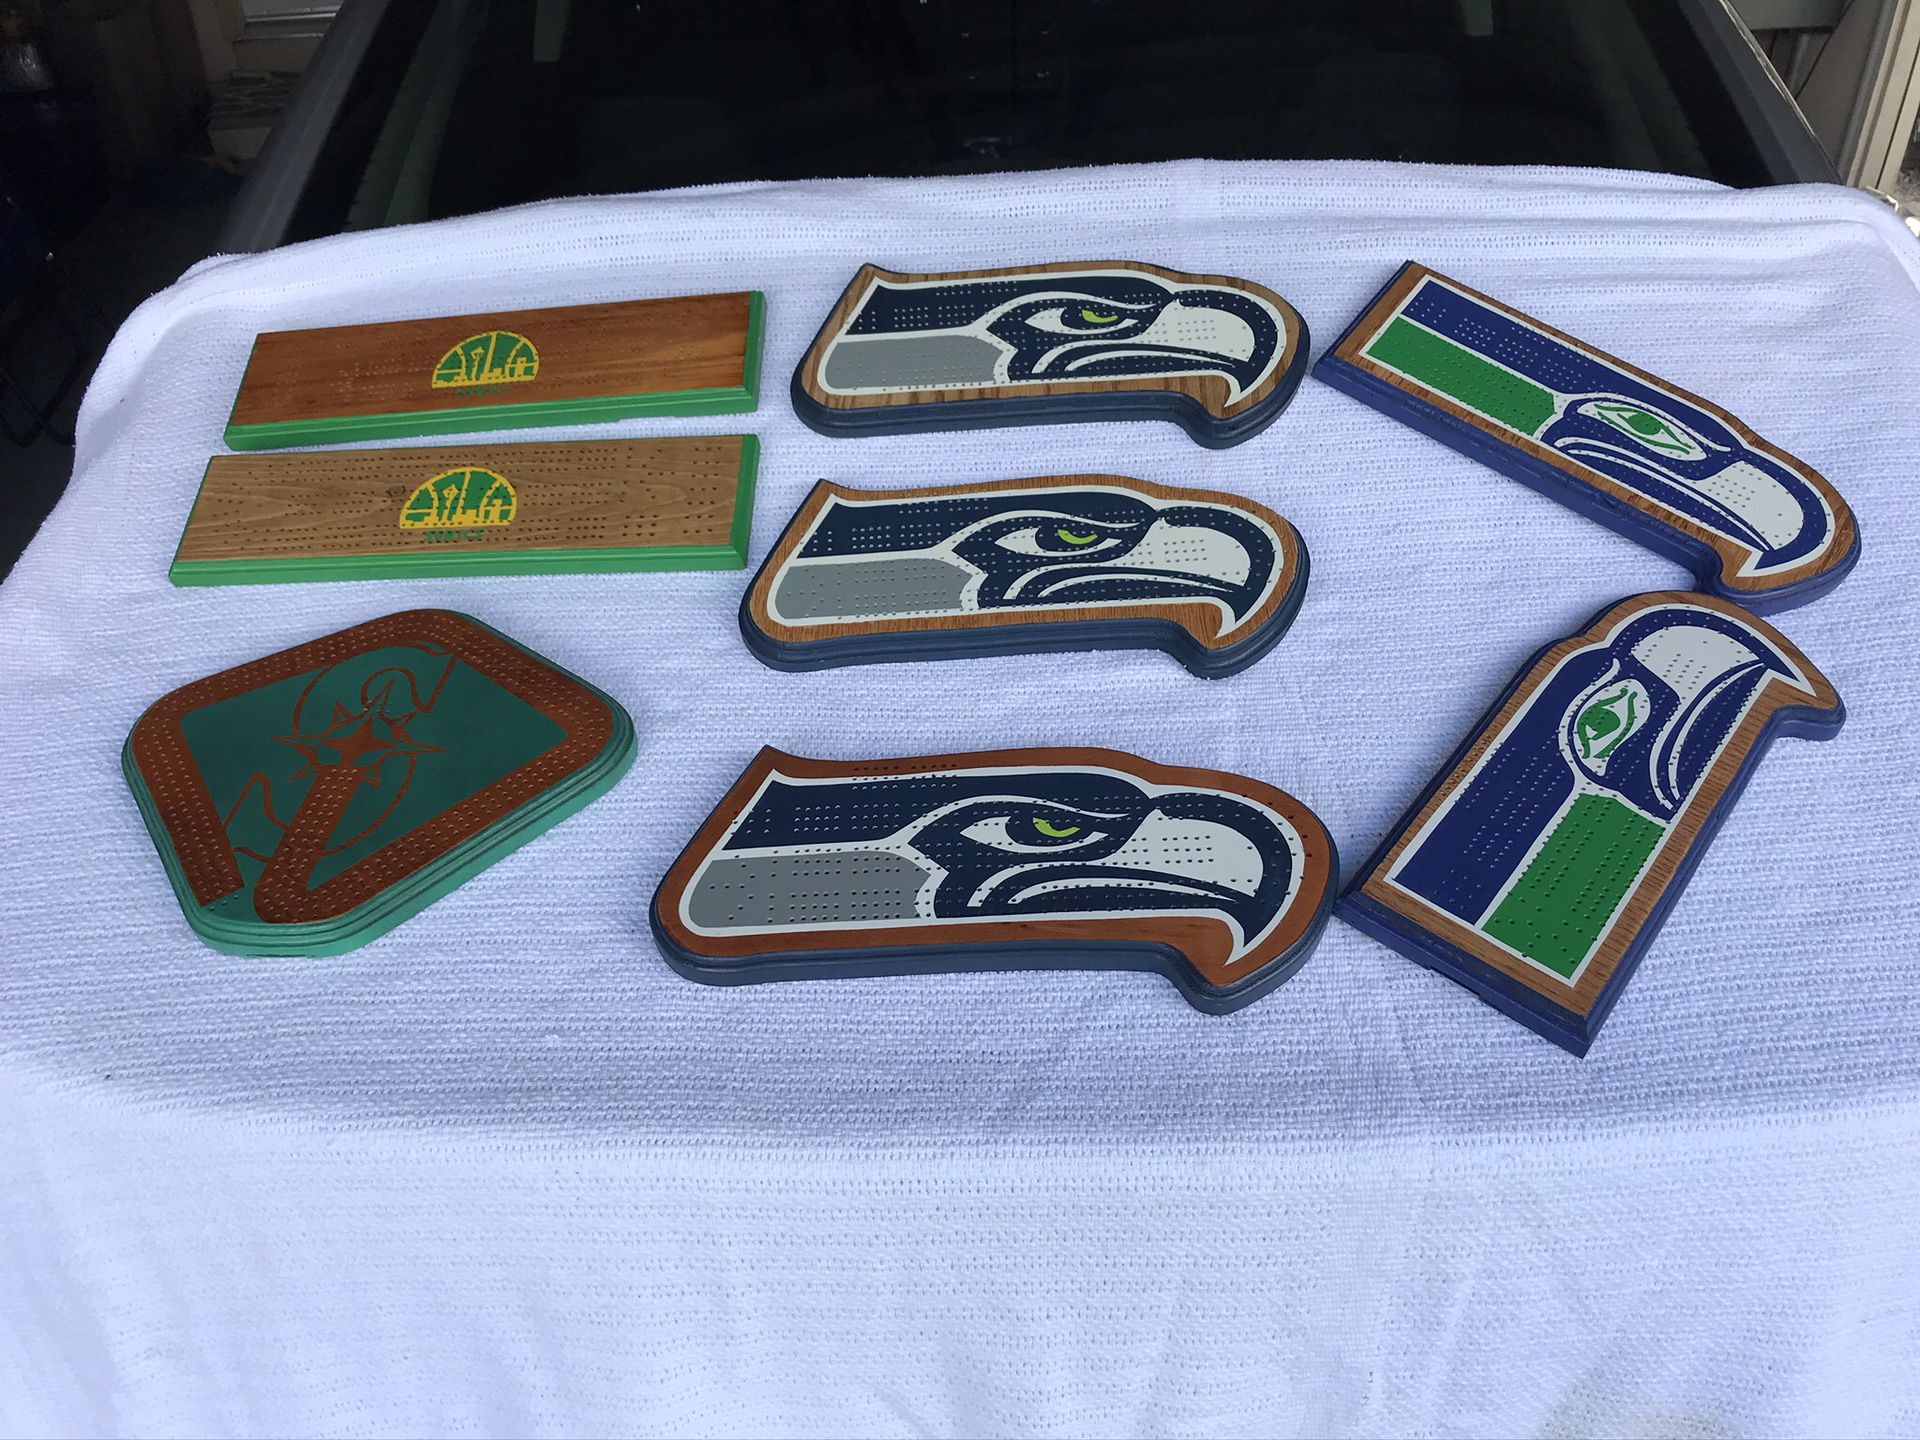 Seahawks Cribbage boards